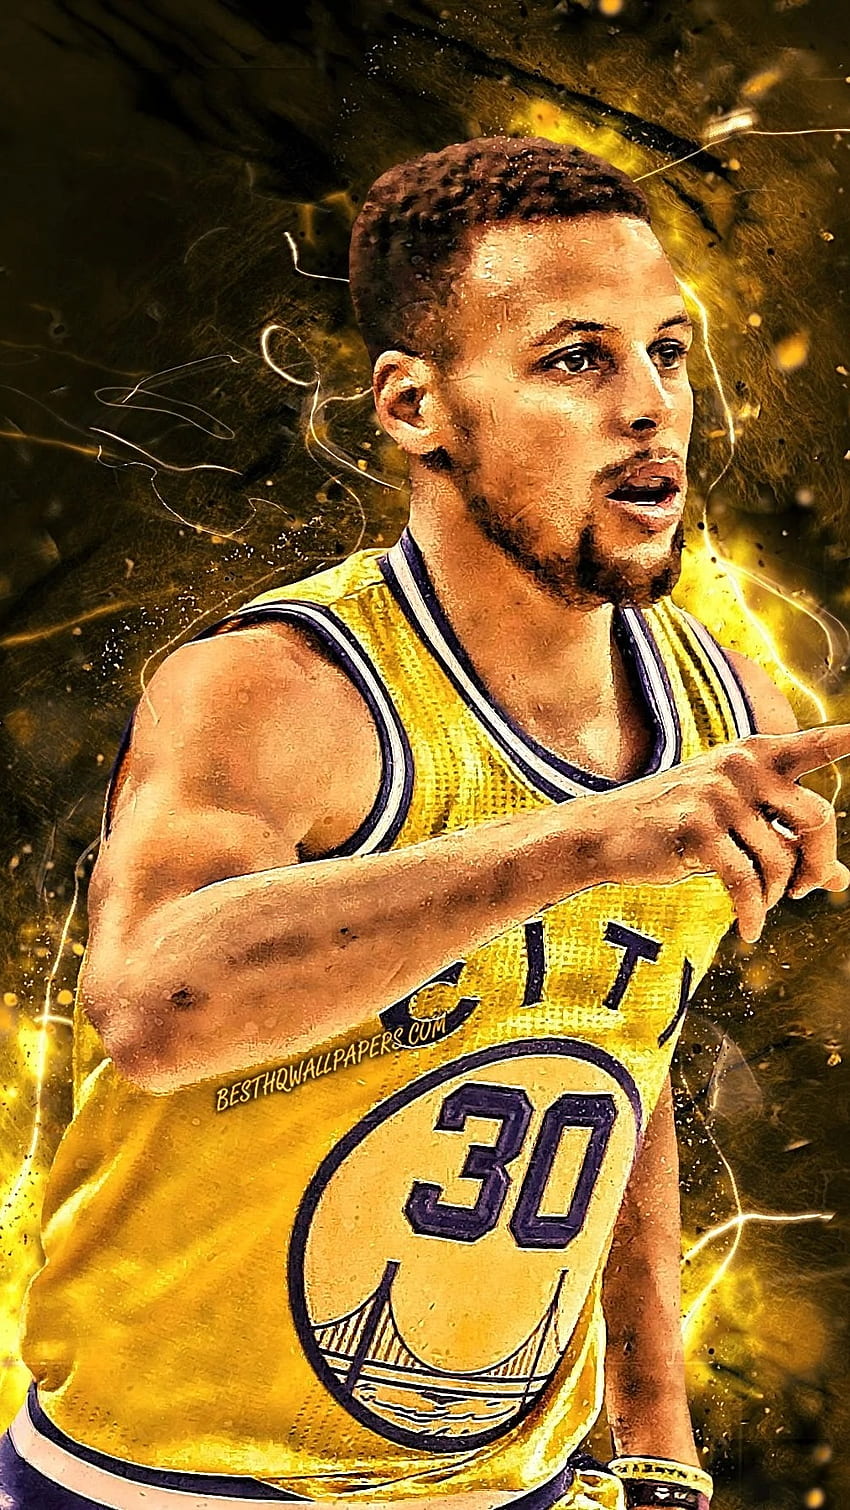 Stephen Curry Wallpaper Gifts  Merchandise for Sale  Redbubble